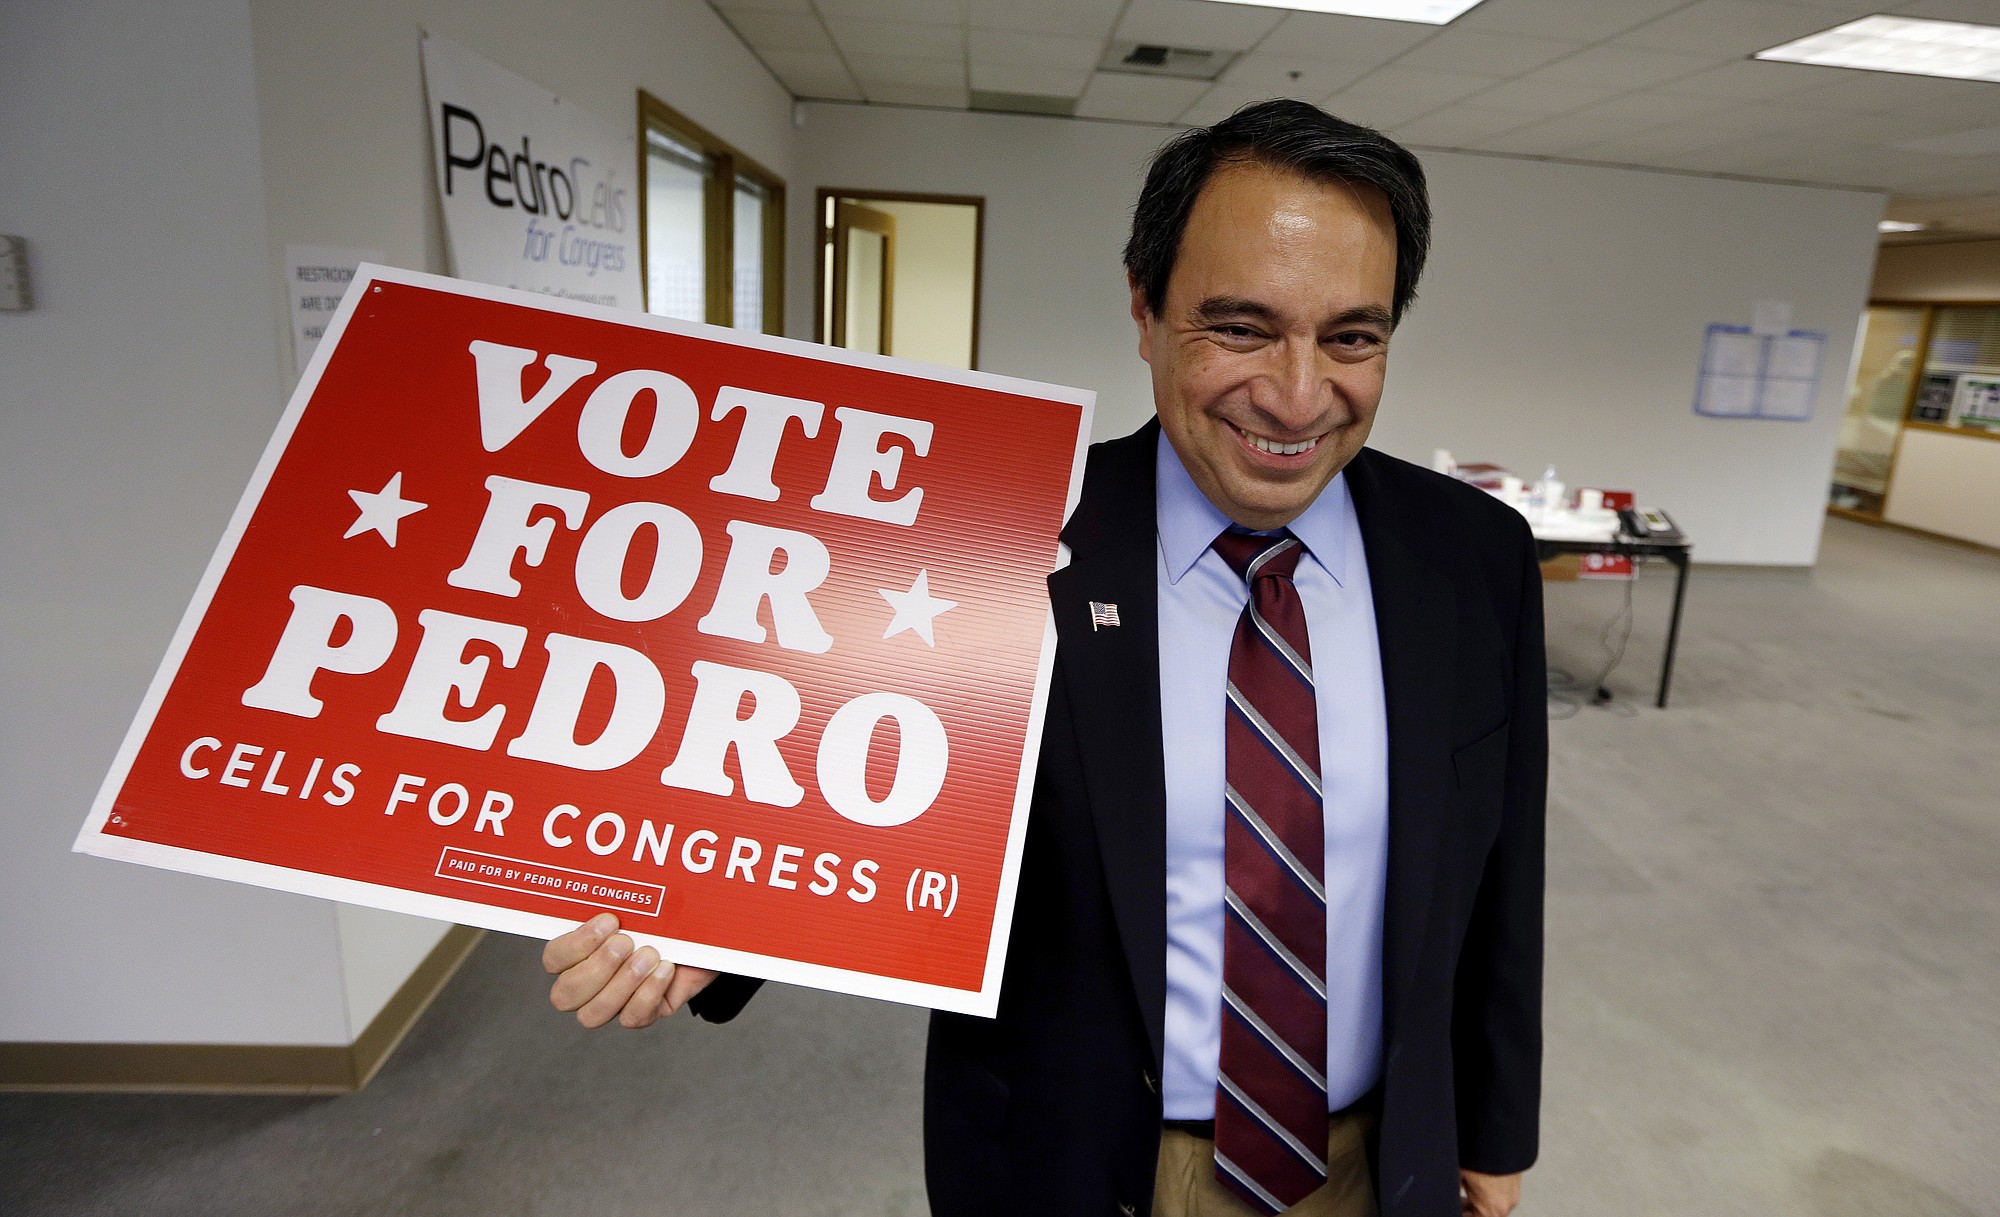 Pedro Celis, a Republican candidate for Congress, poses for a photo in his campaign headquarters in Woodinville.